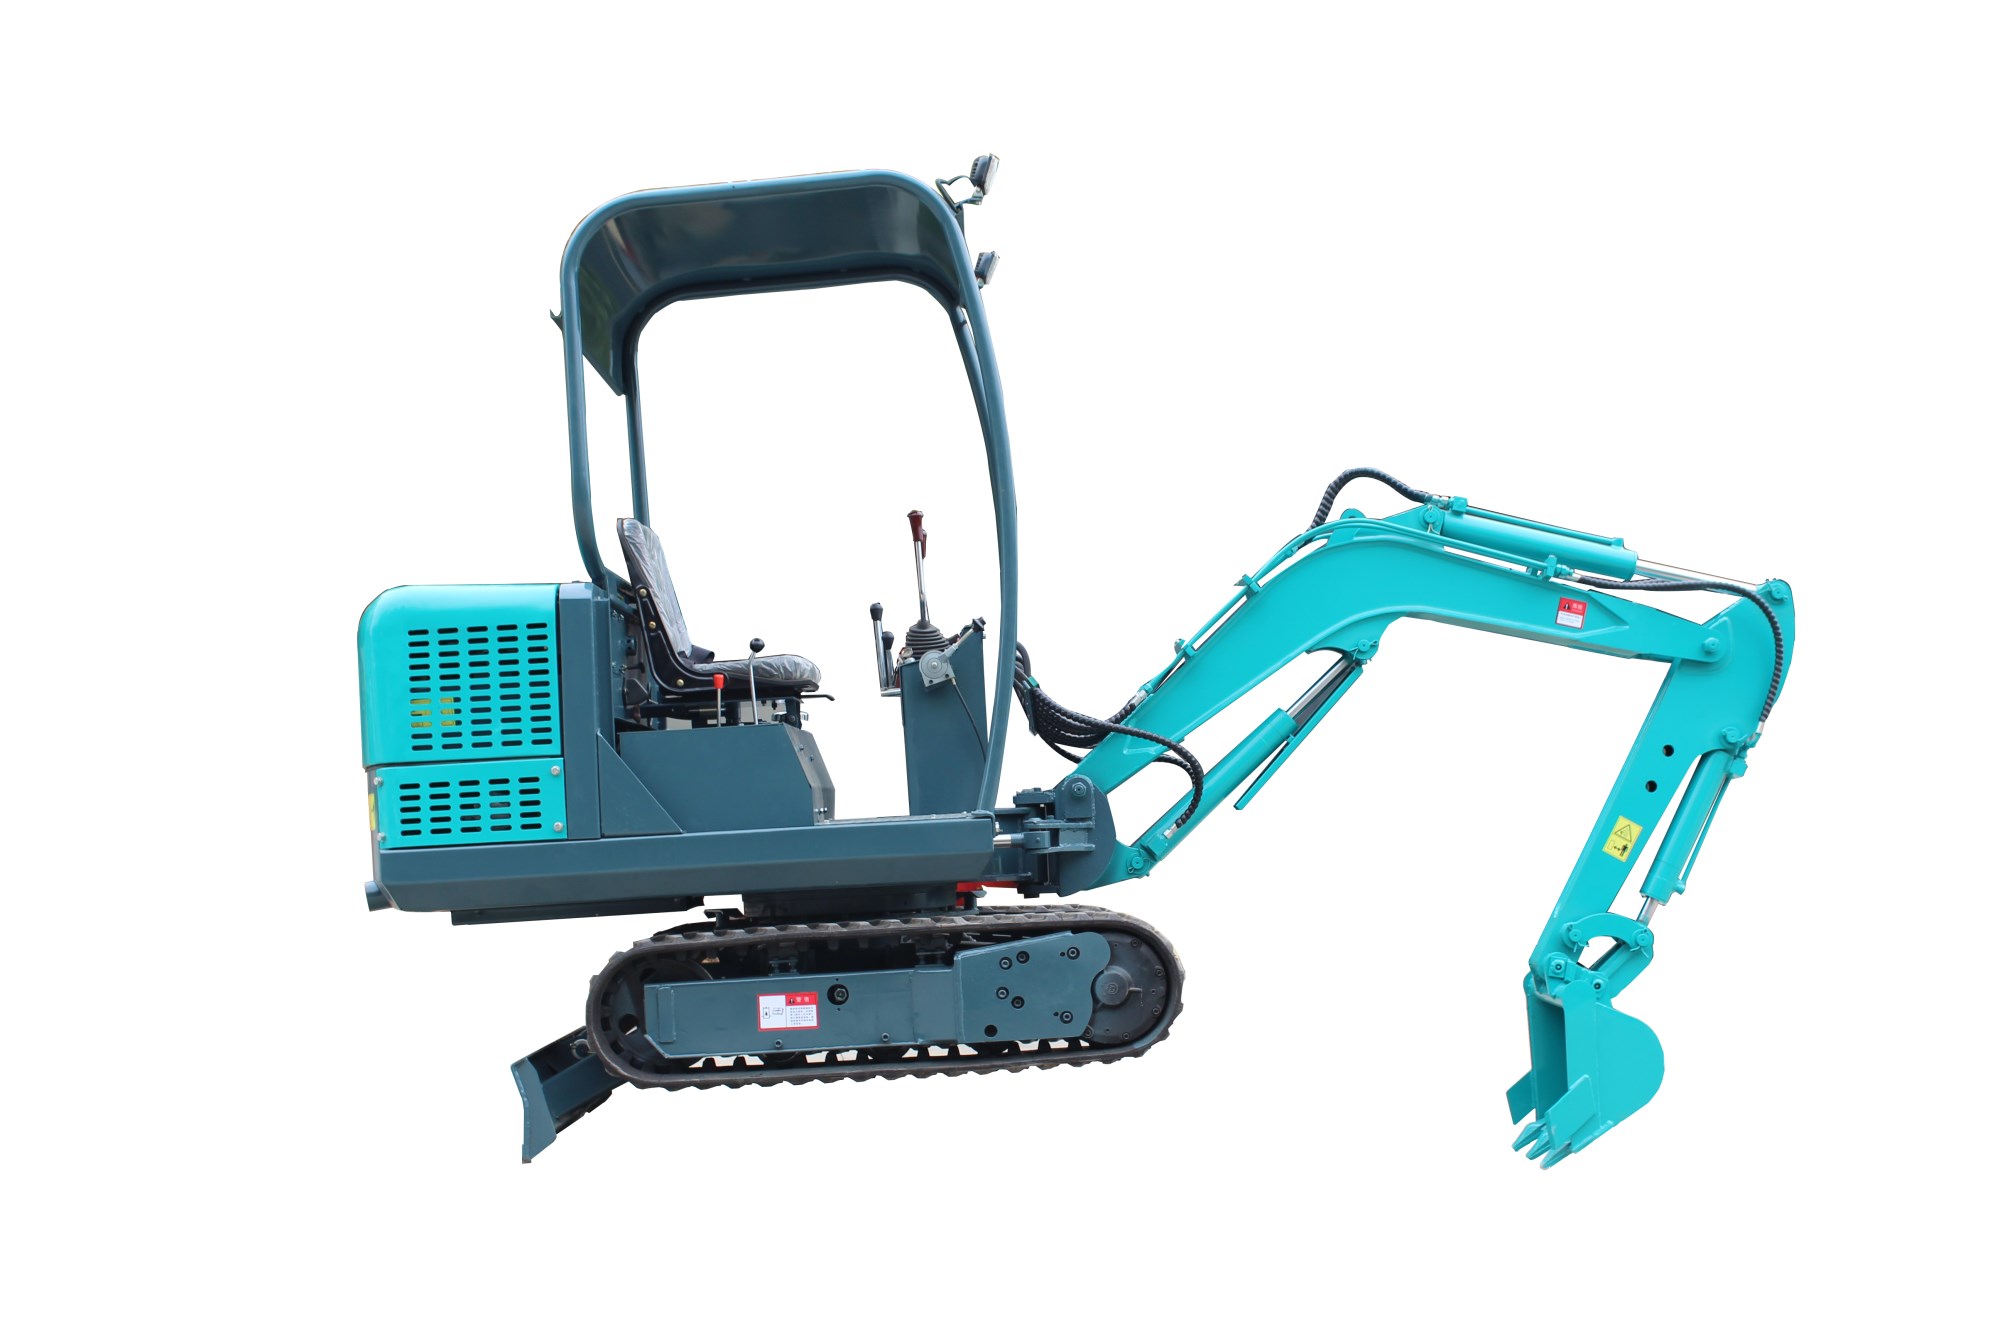 Micro hydraulic excavator walking control and attention matters